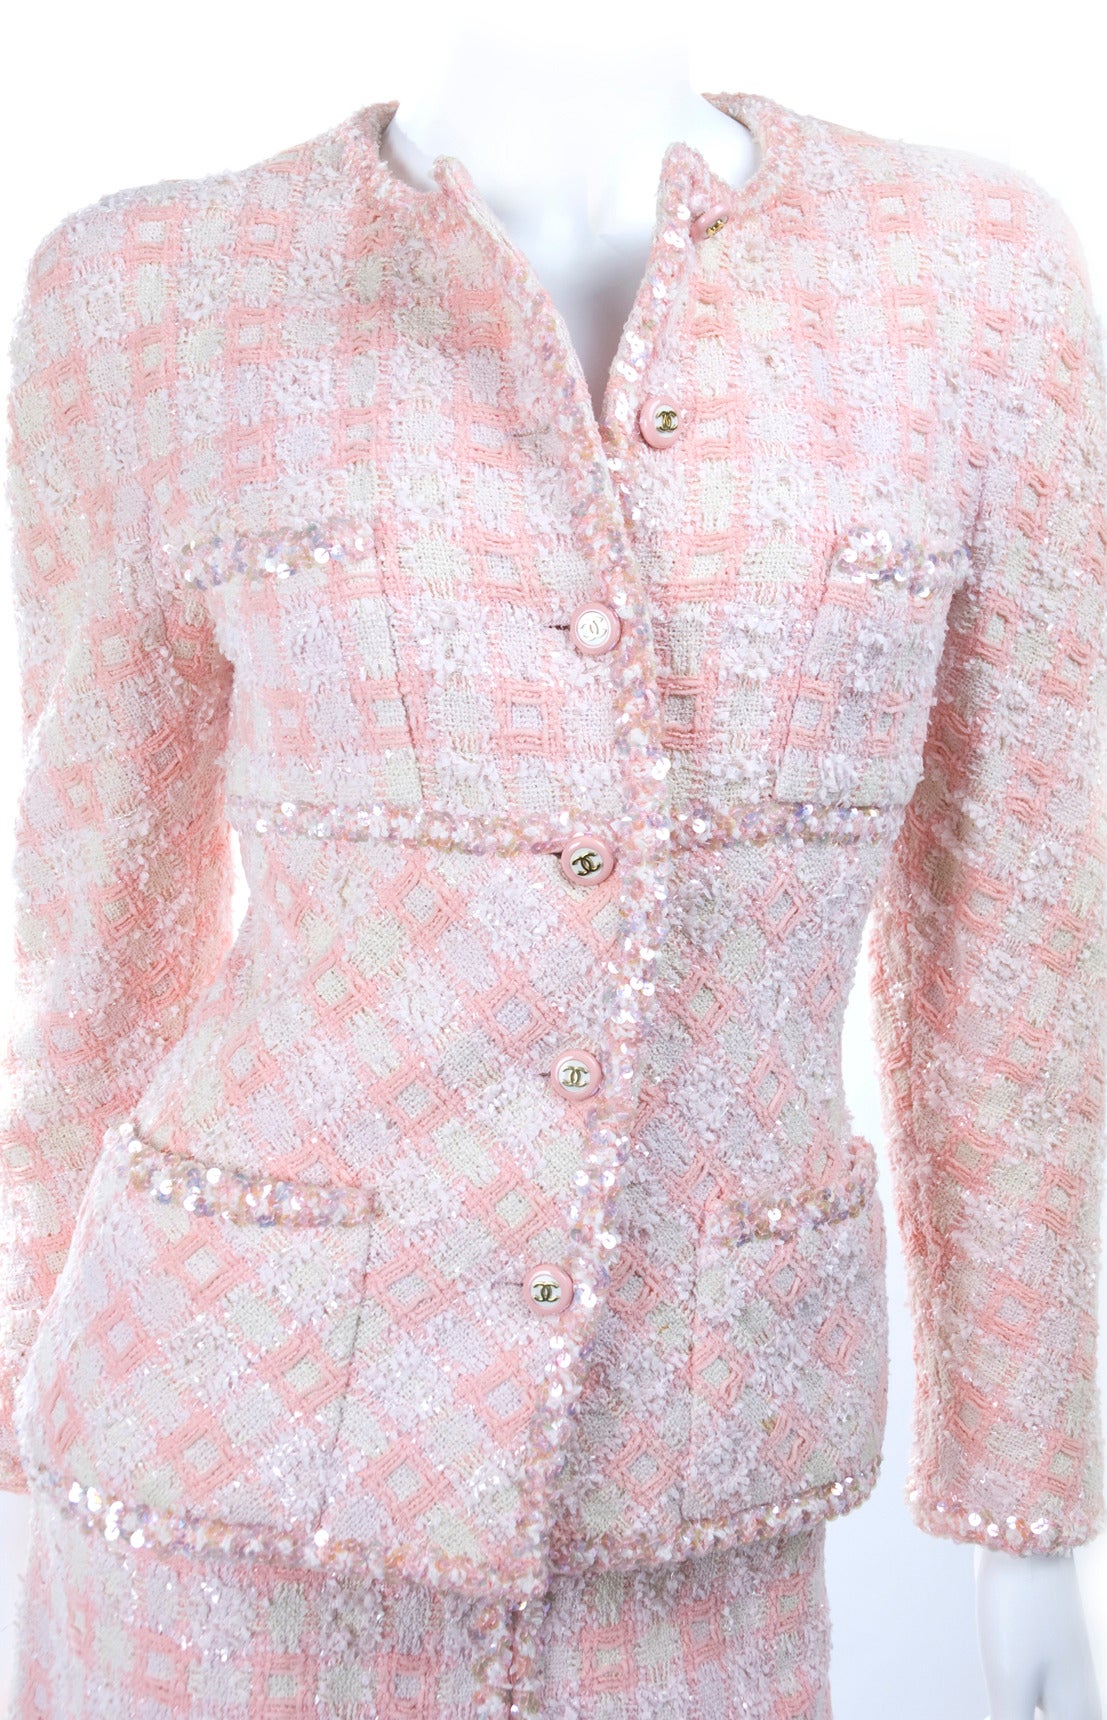 Women's 1995 Chanel Suit with Sequins Documented